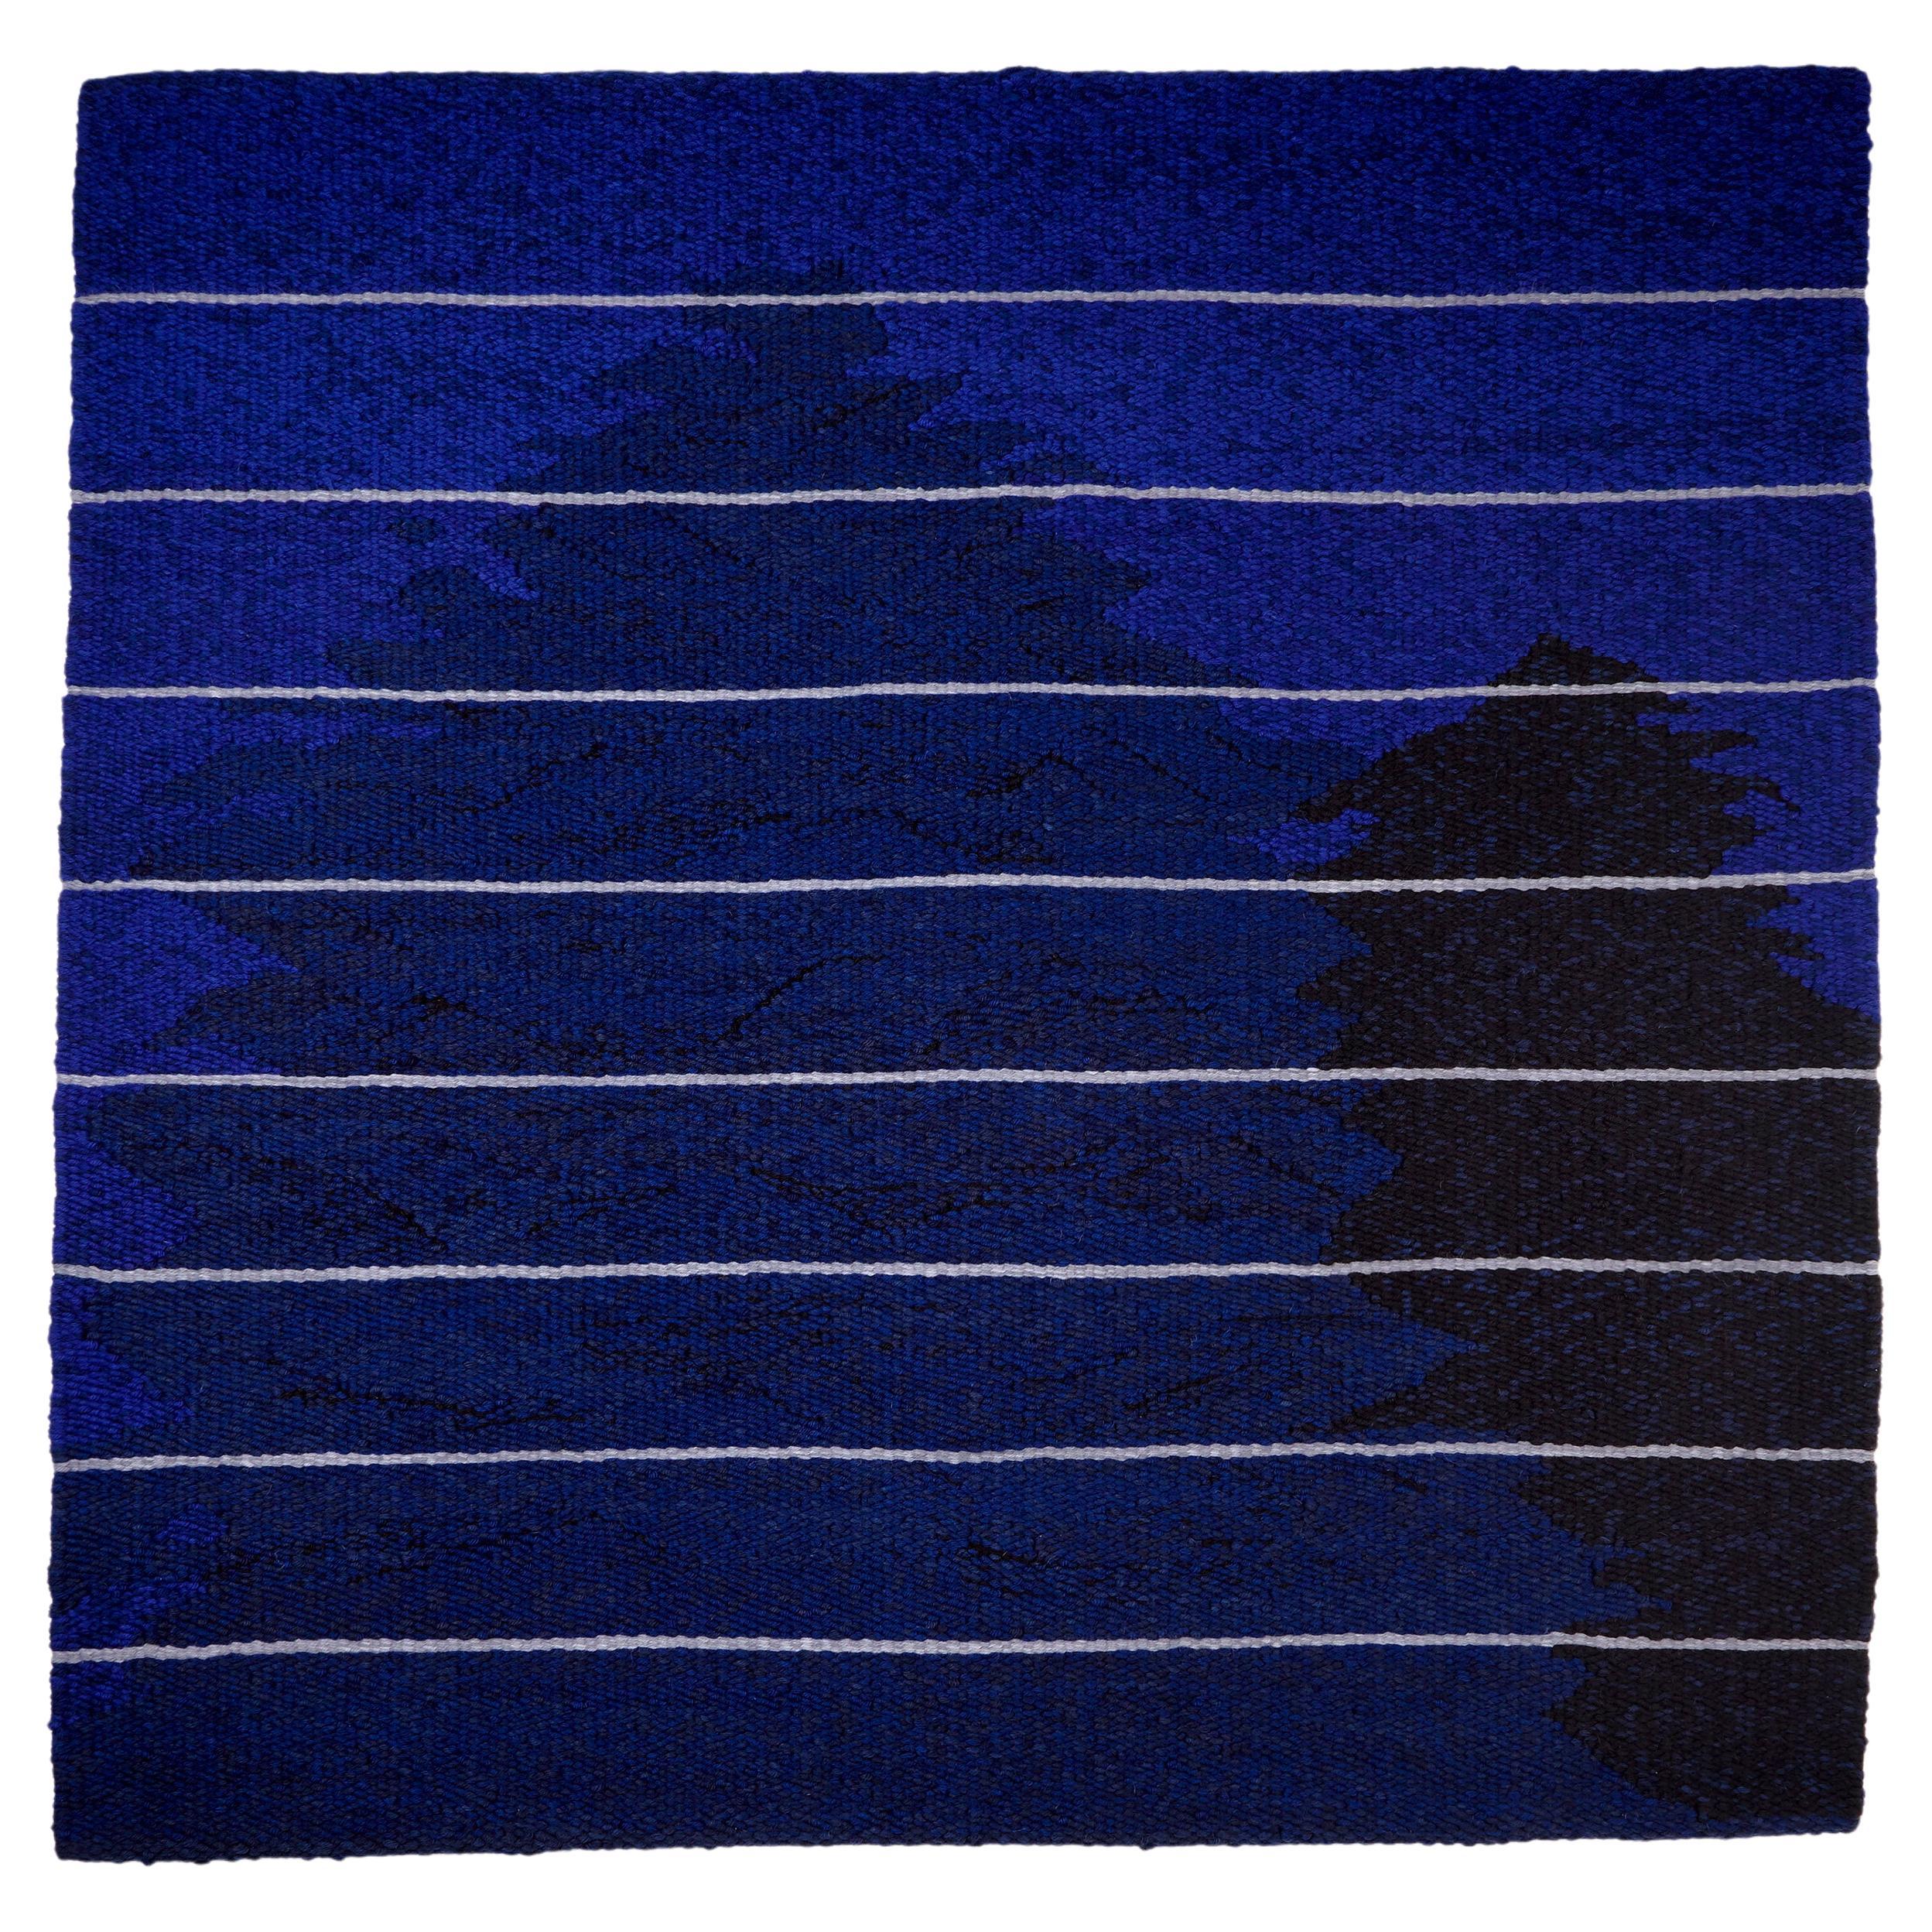 Contemporary Woven Tapestry: Midnight, Moonlight and Shadows